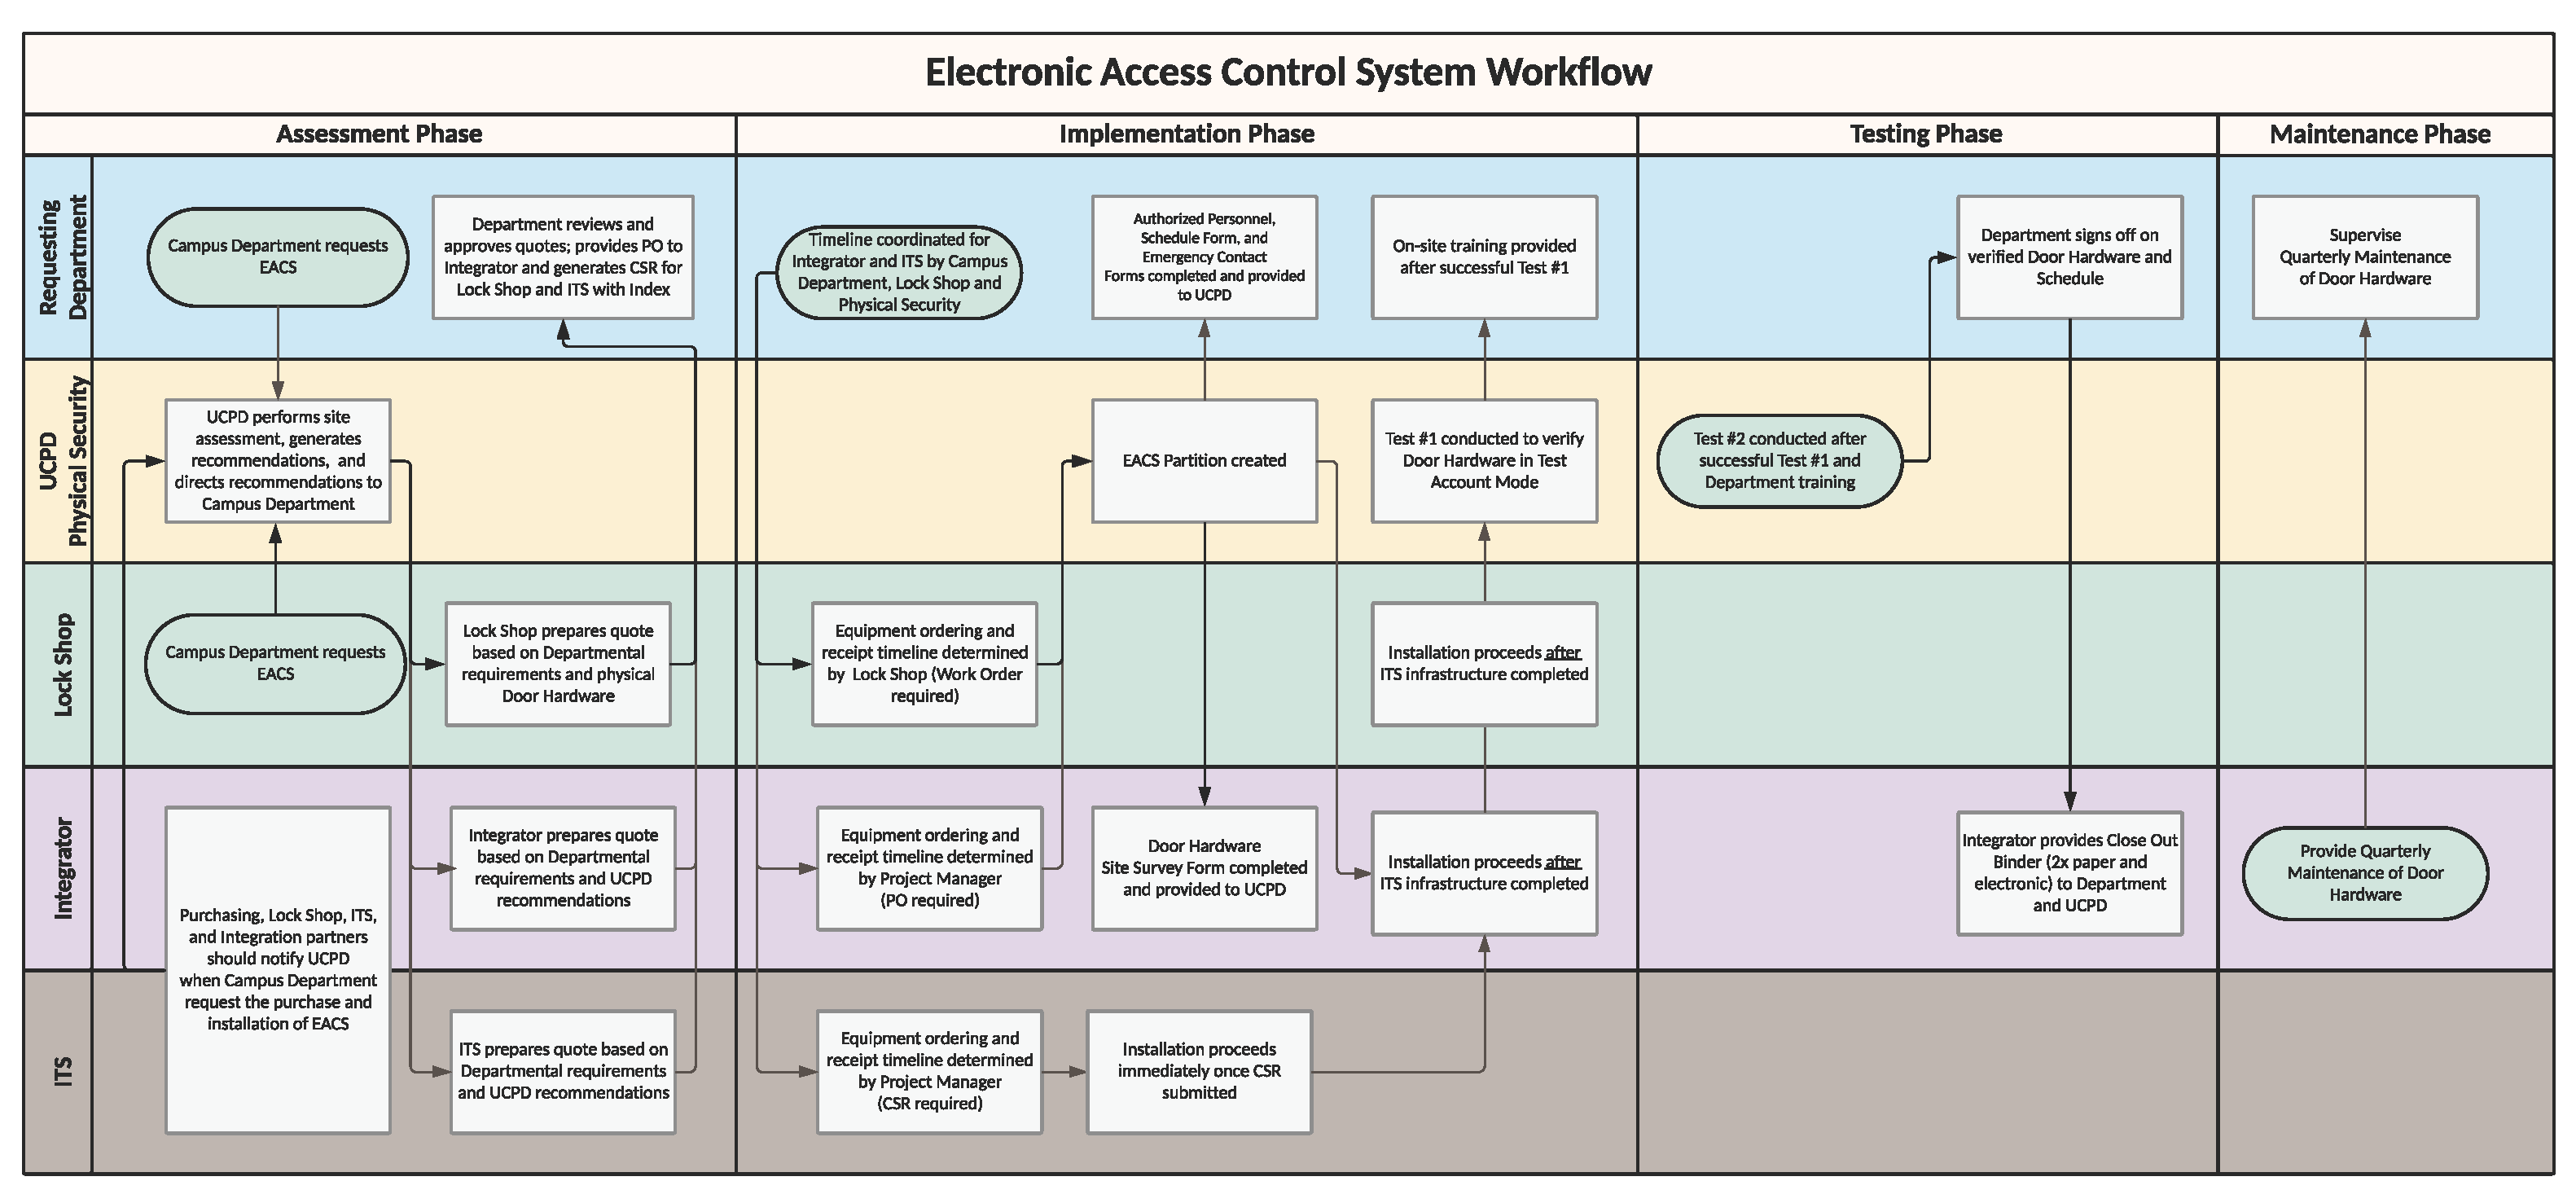 Electronic Access Control System Workflow